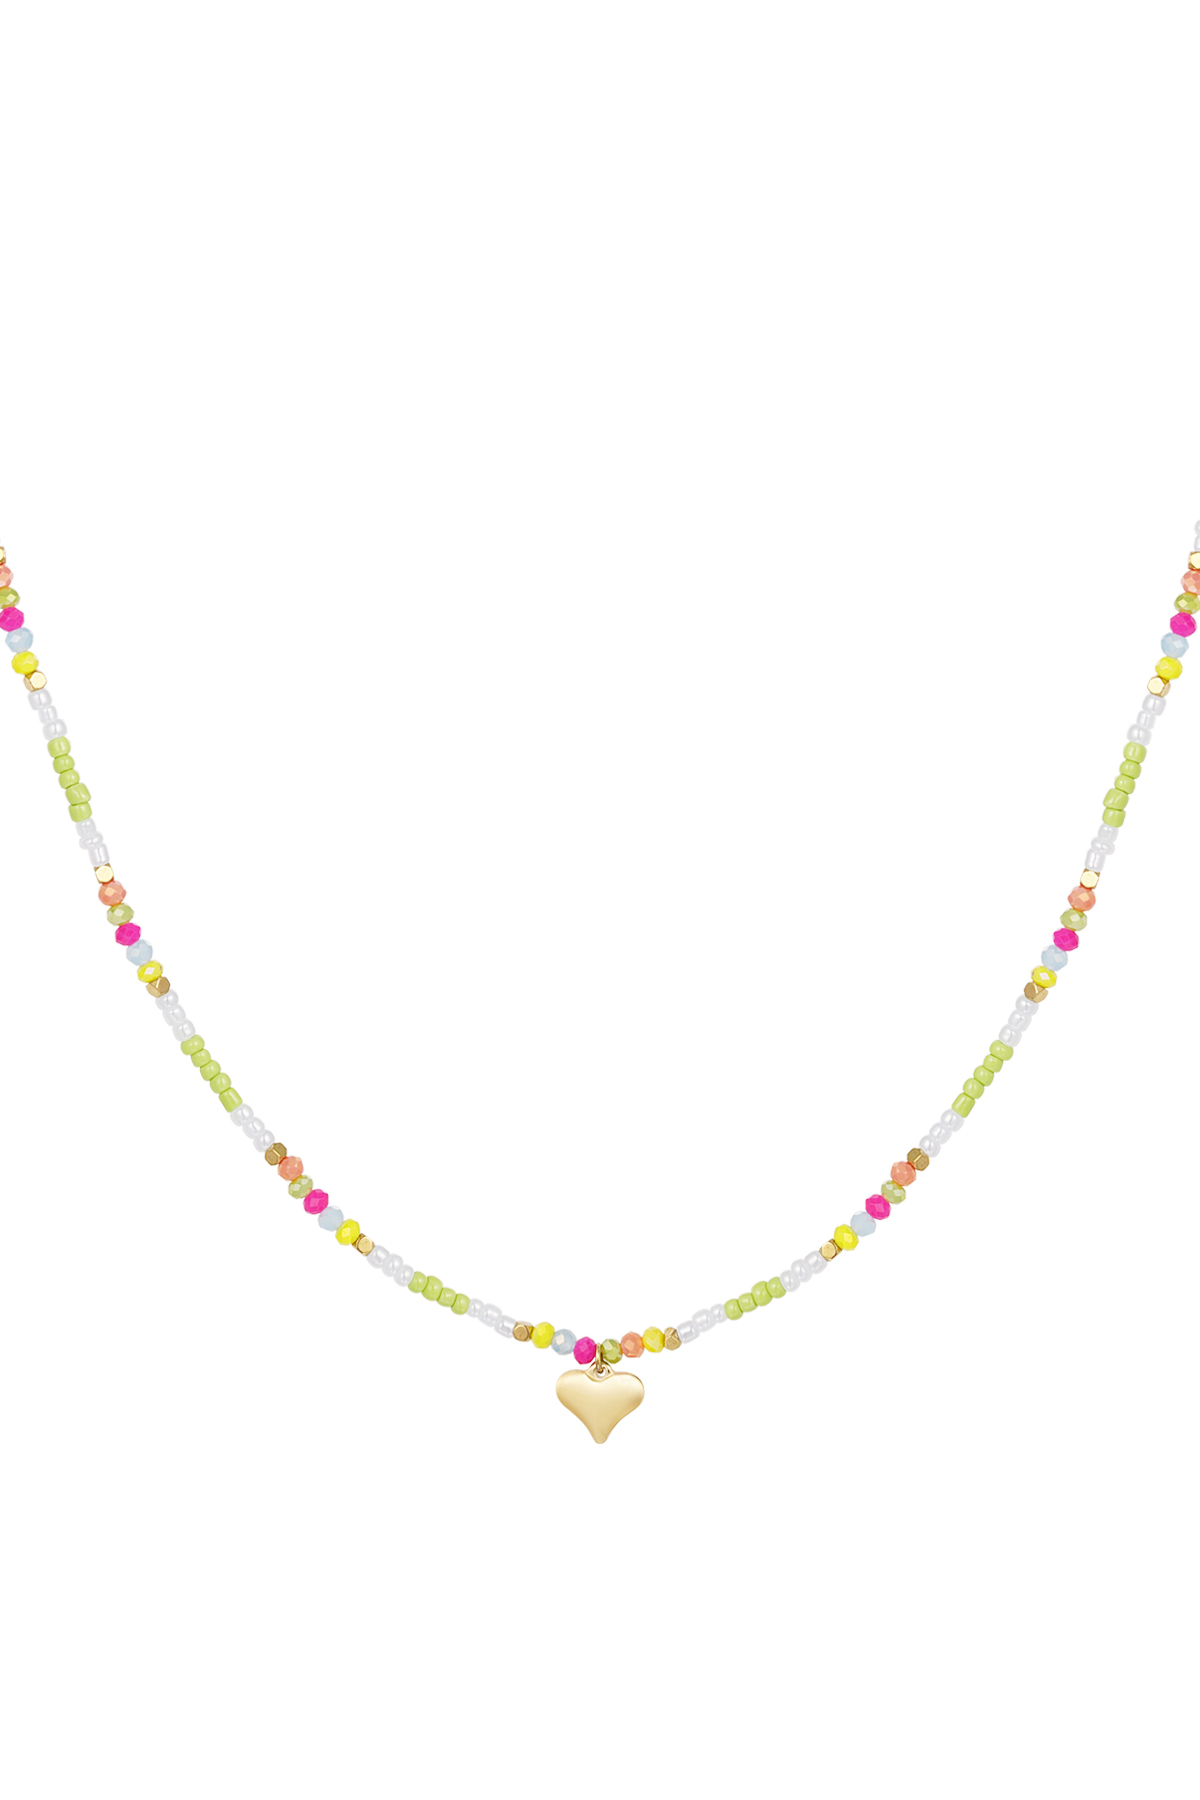 Colorful beaded necklace with heart charm - green/multi h5 